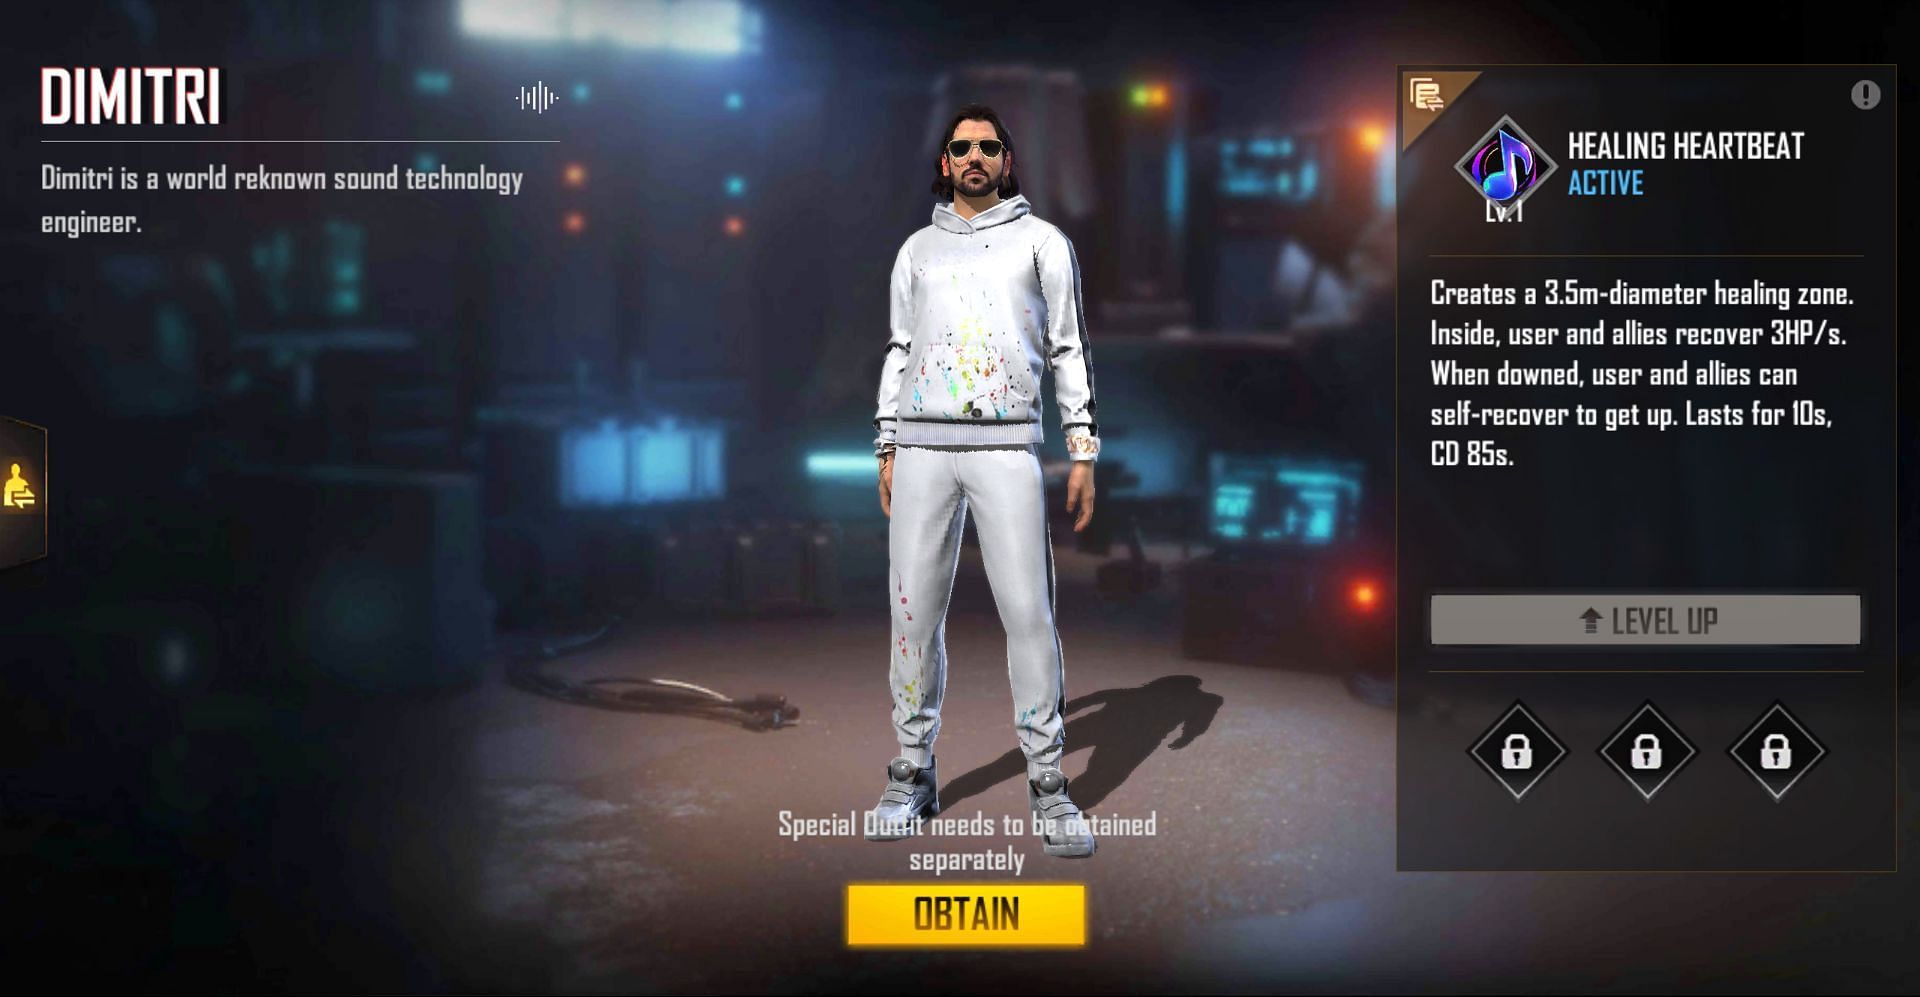  Dimitri was added to the game with Free Fire x Dimitri Vegas &amp; Like (Image via Free Fire)